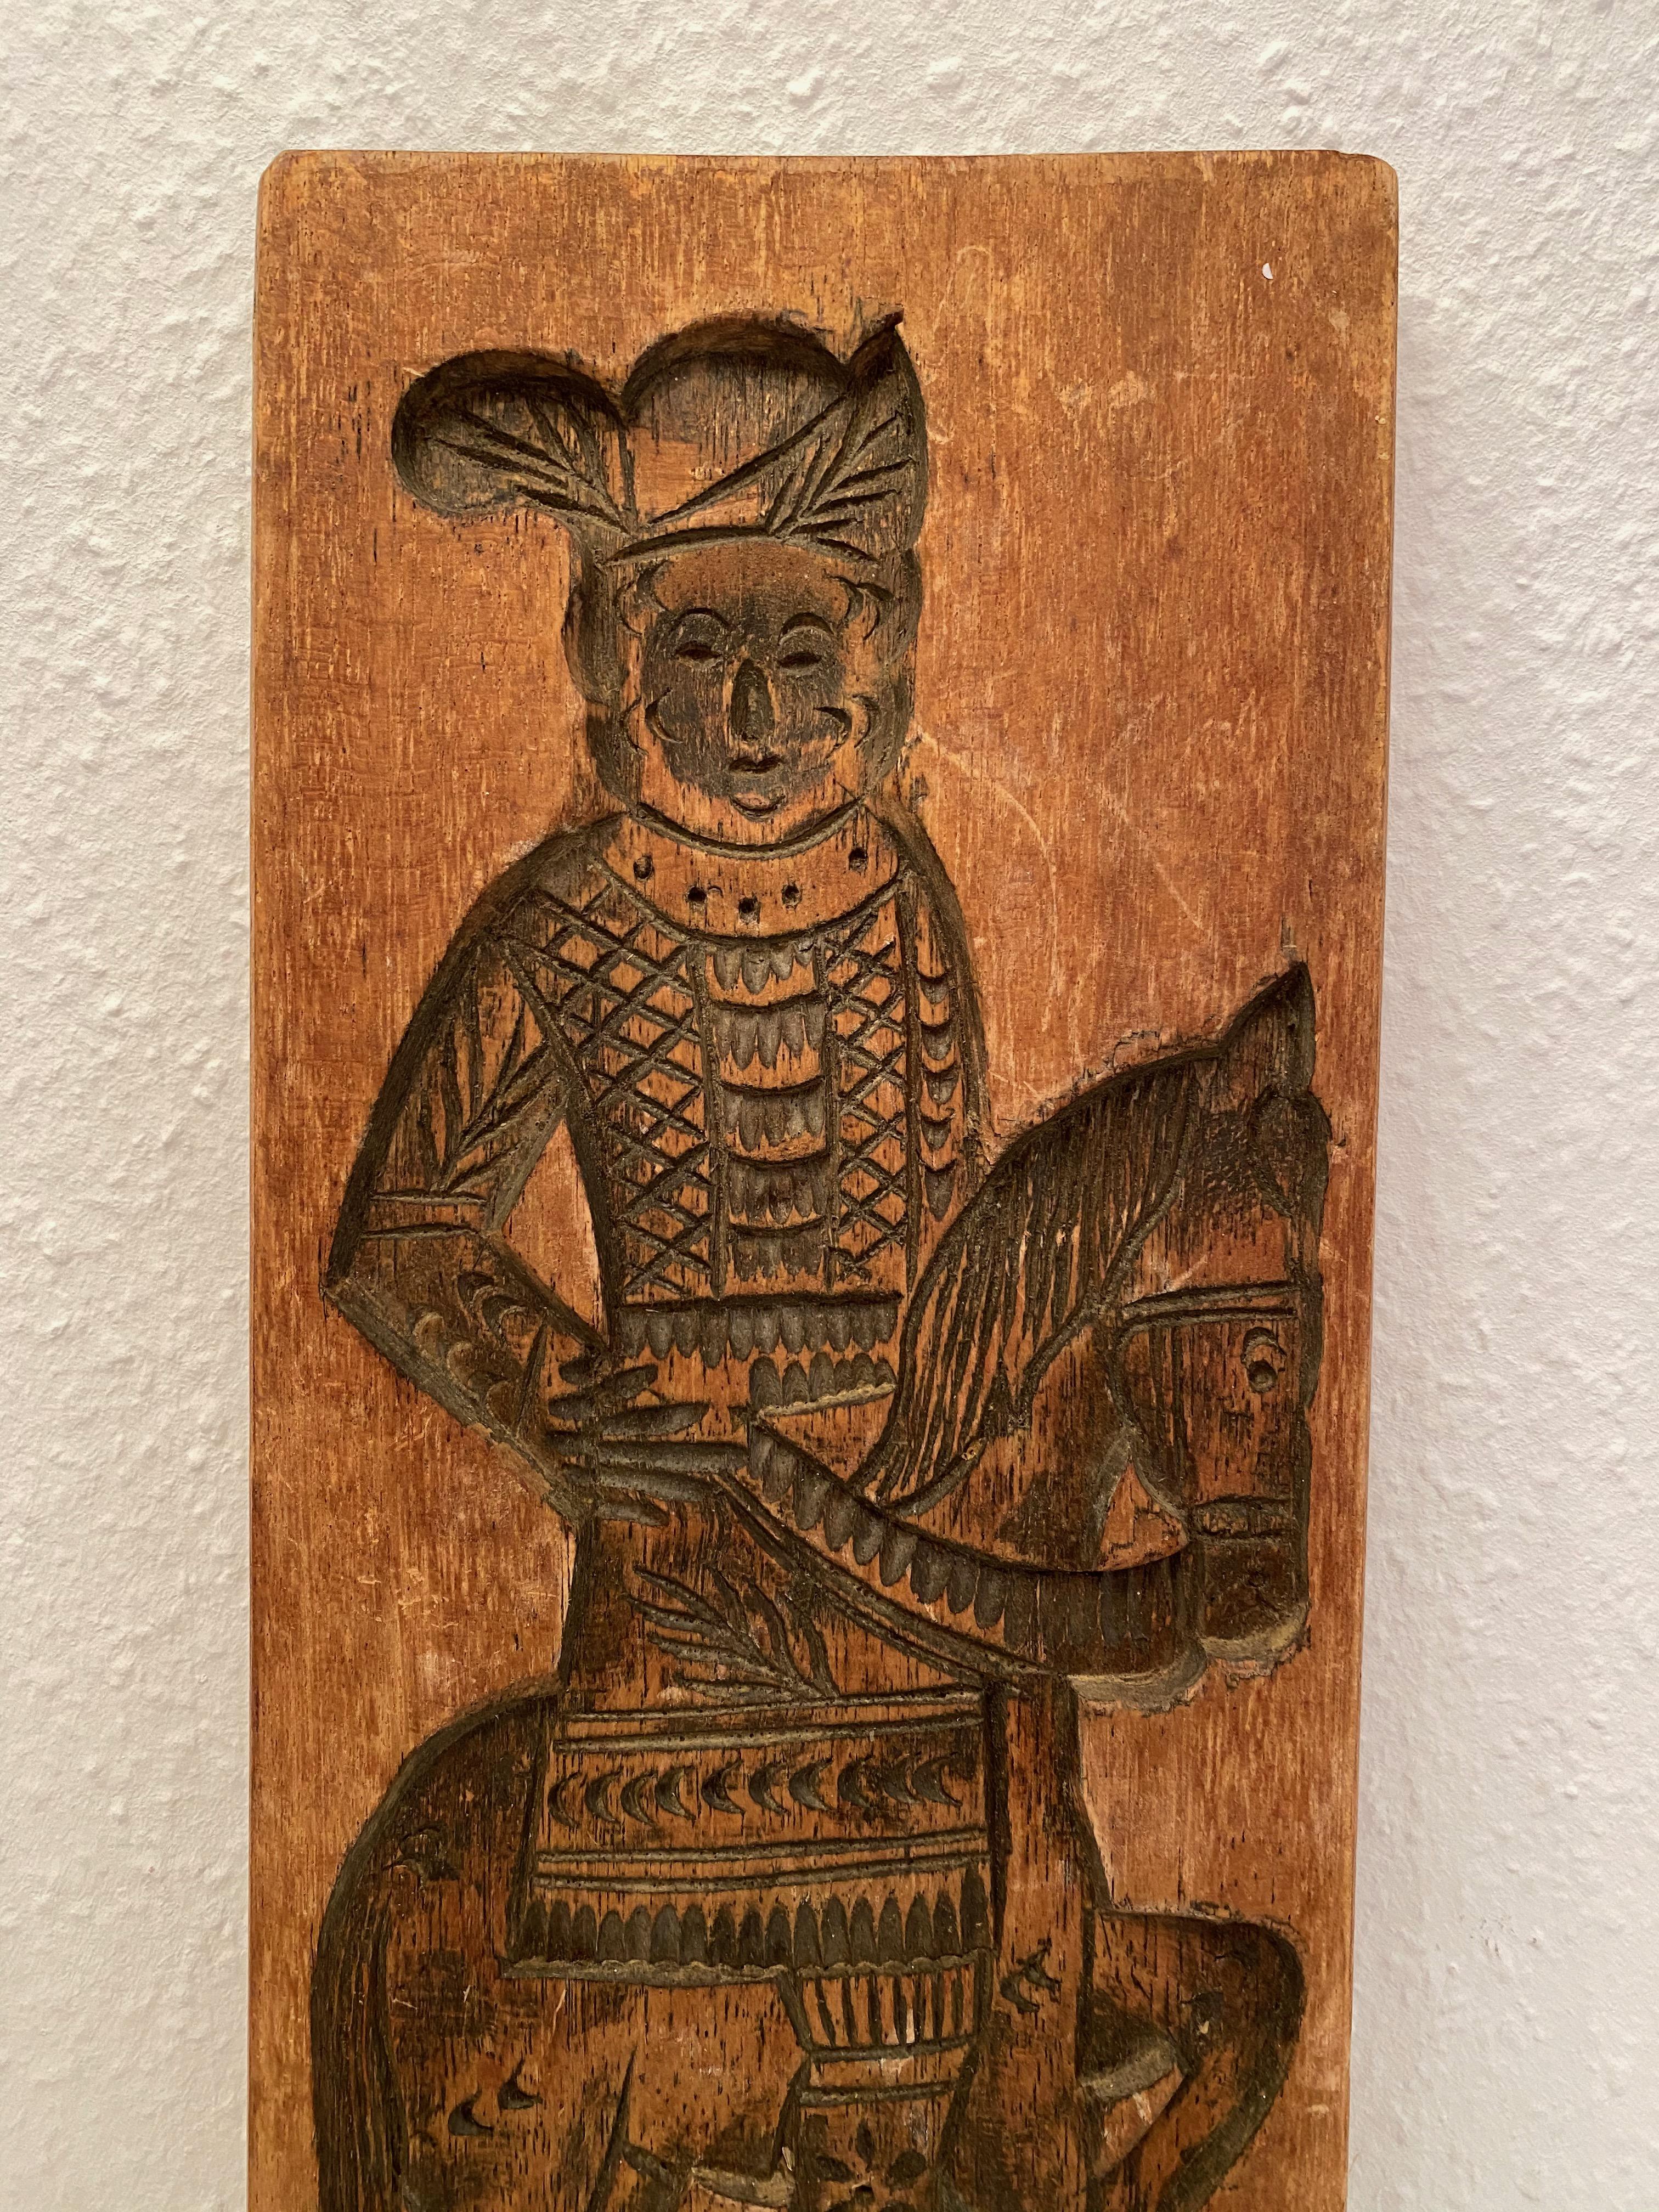 Classic 19th century wooden gingerbread gingerbread cookie or speculaas springerle mold, circa 1860-1880 (Noble Horseman). Made of hand carved wood. Found at an estate sale in Vienna, Austria.